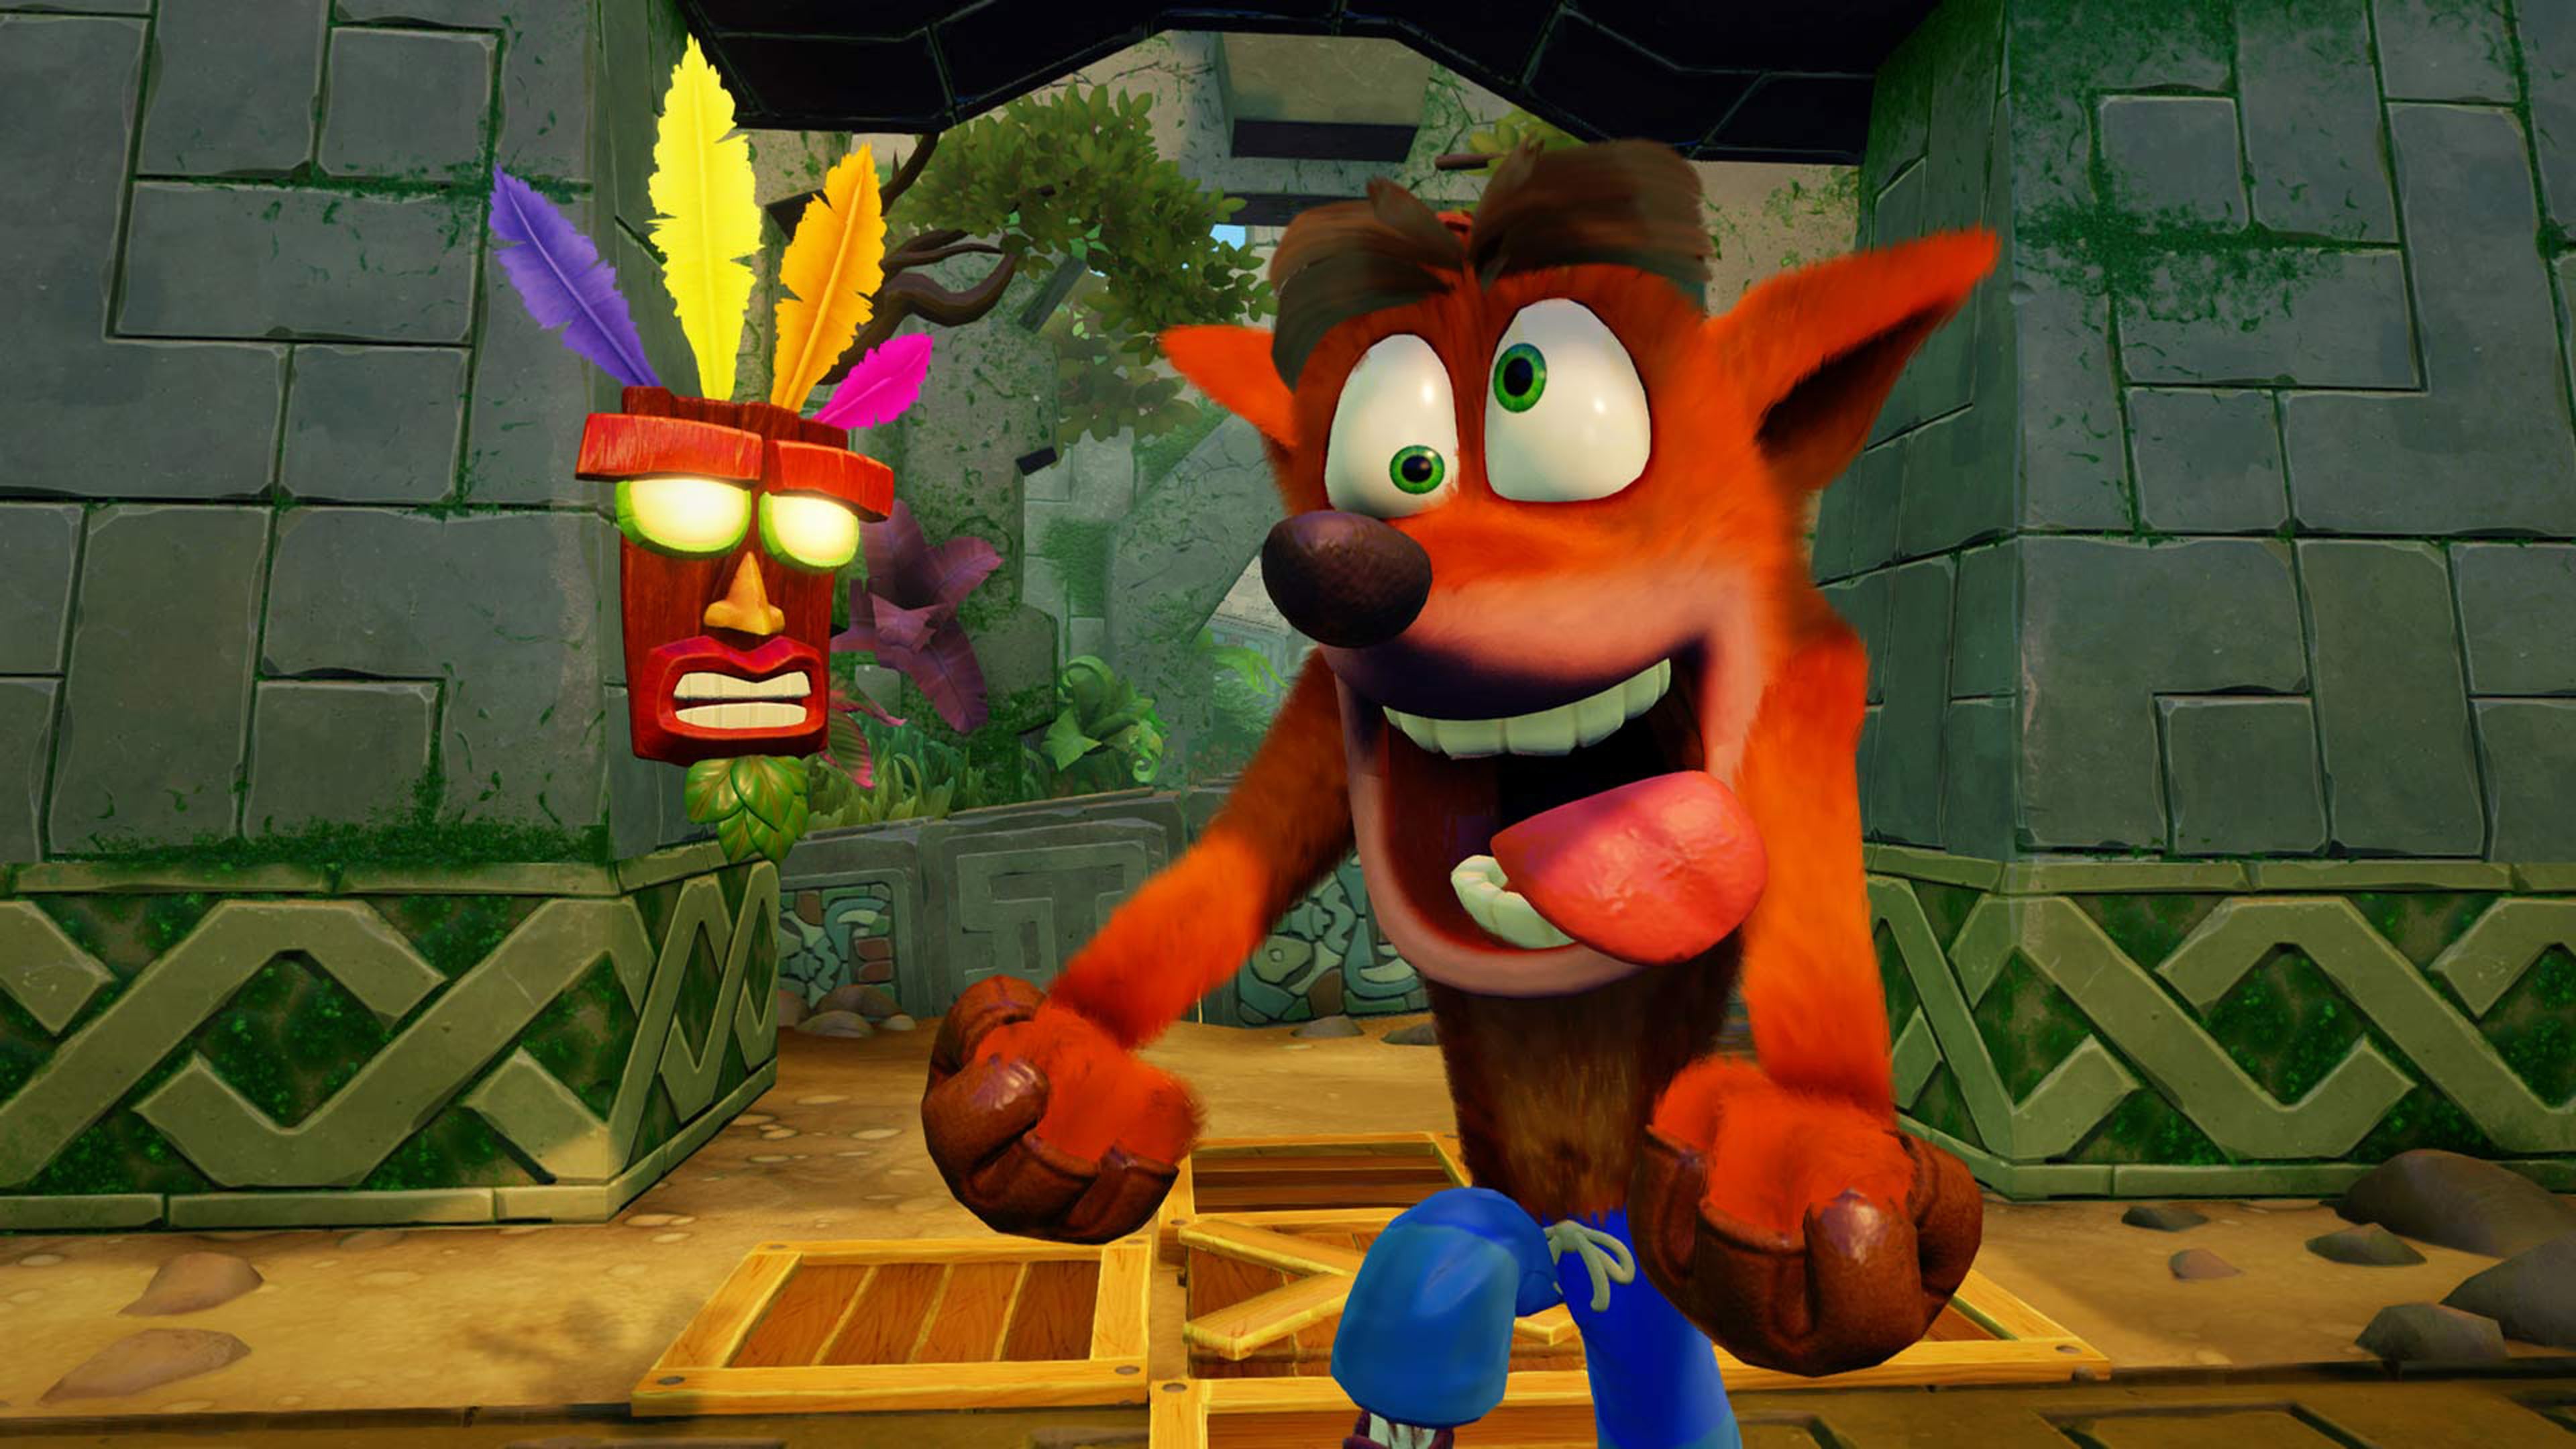 Crash Bandicoot 4: It's About Time - PS4, PlayStation 4